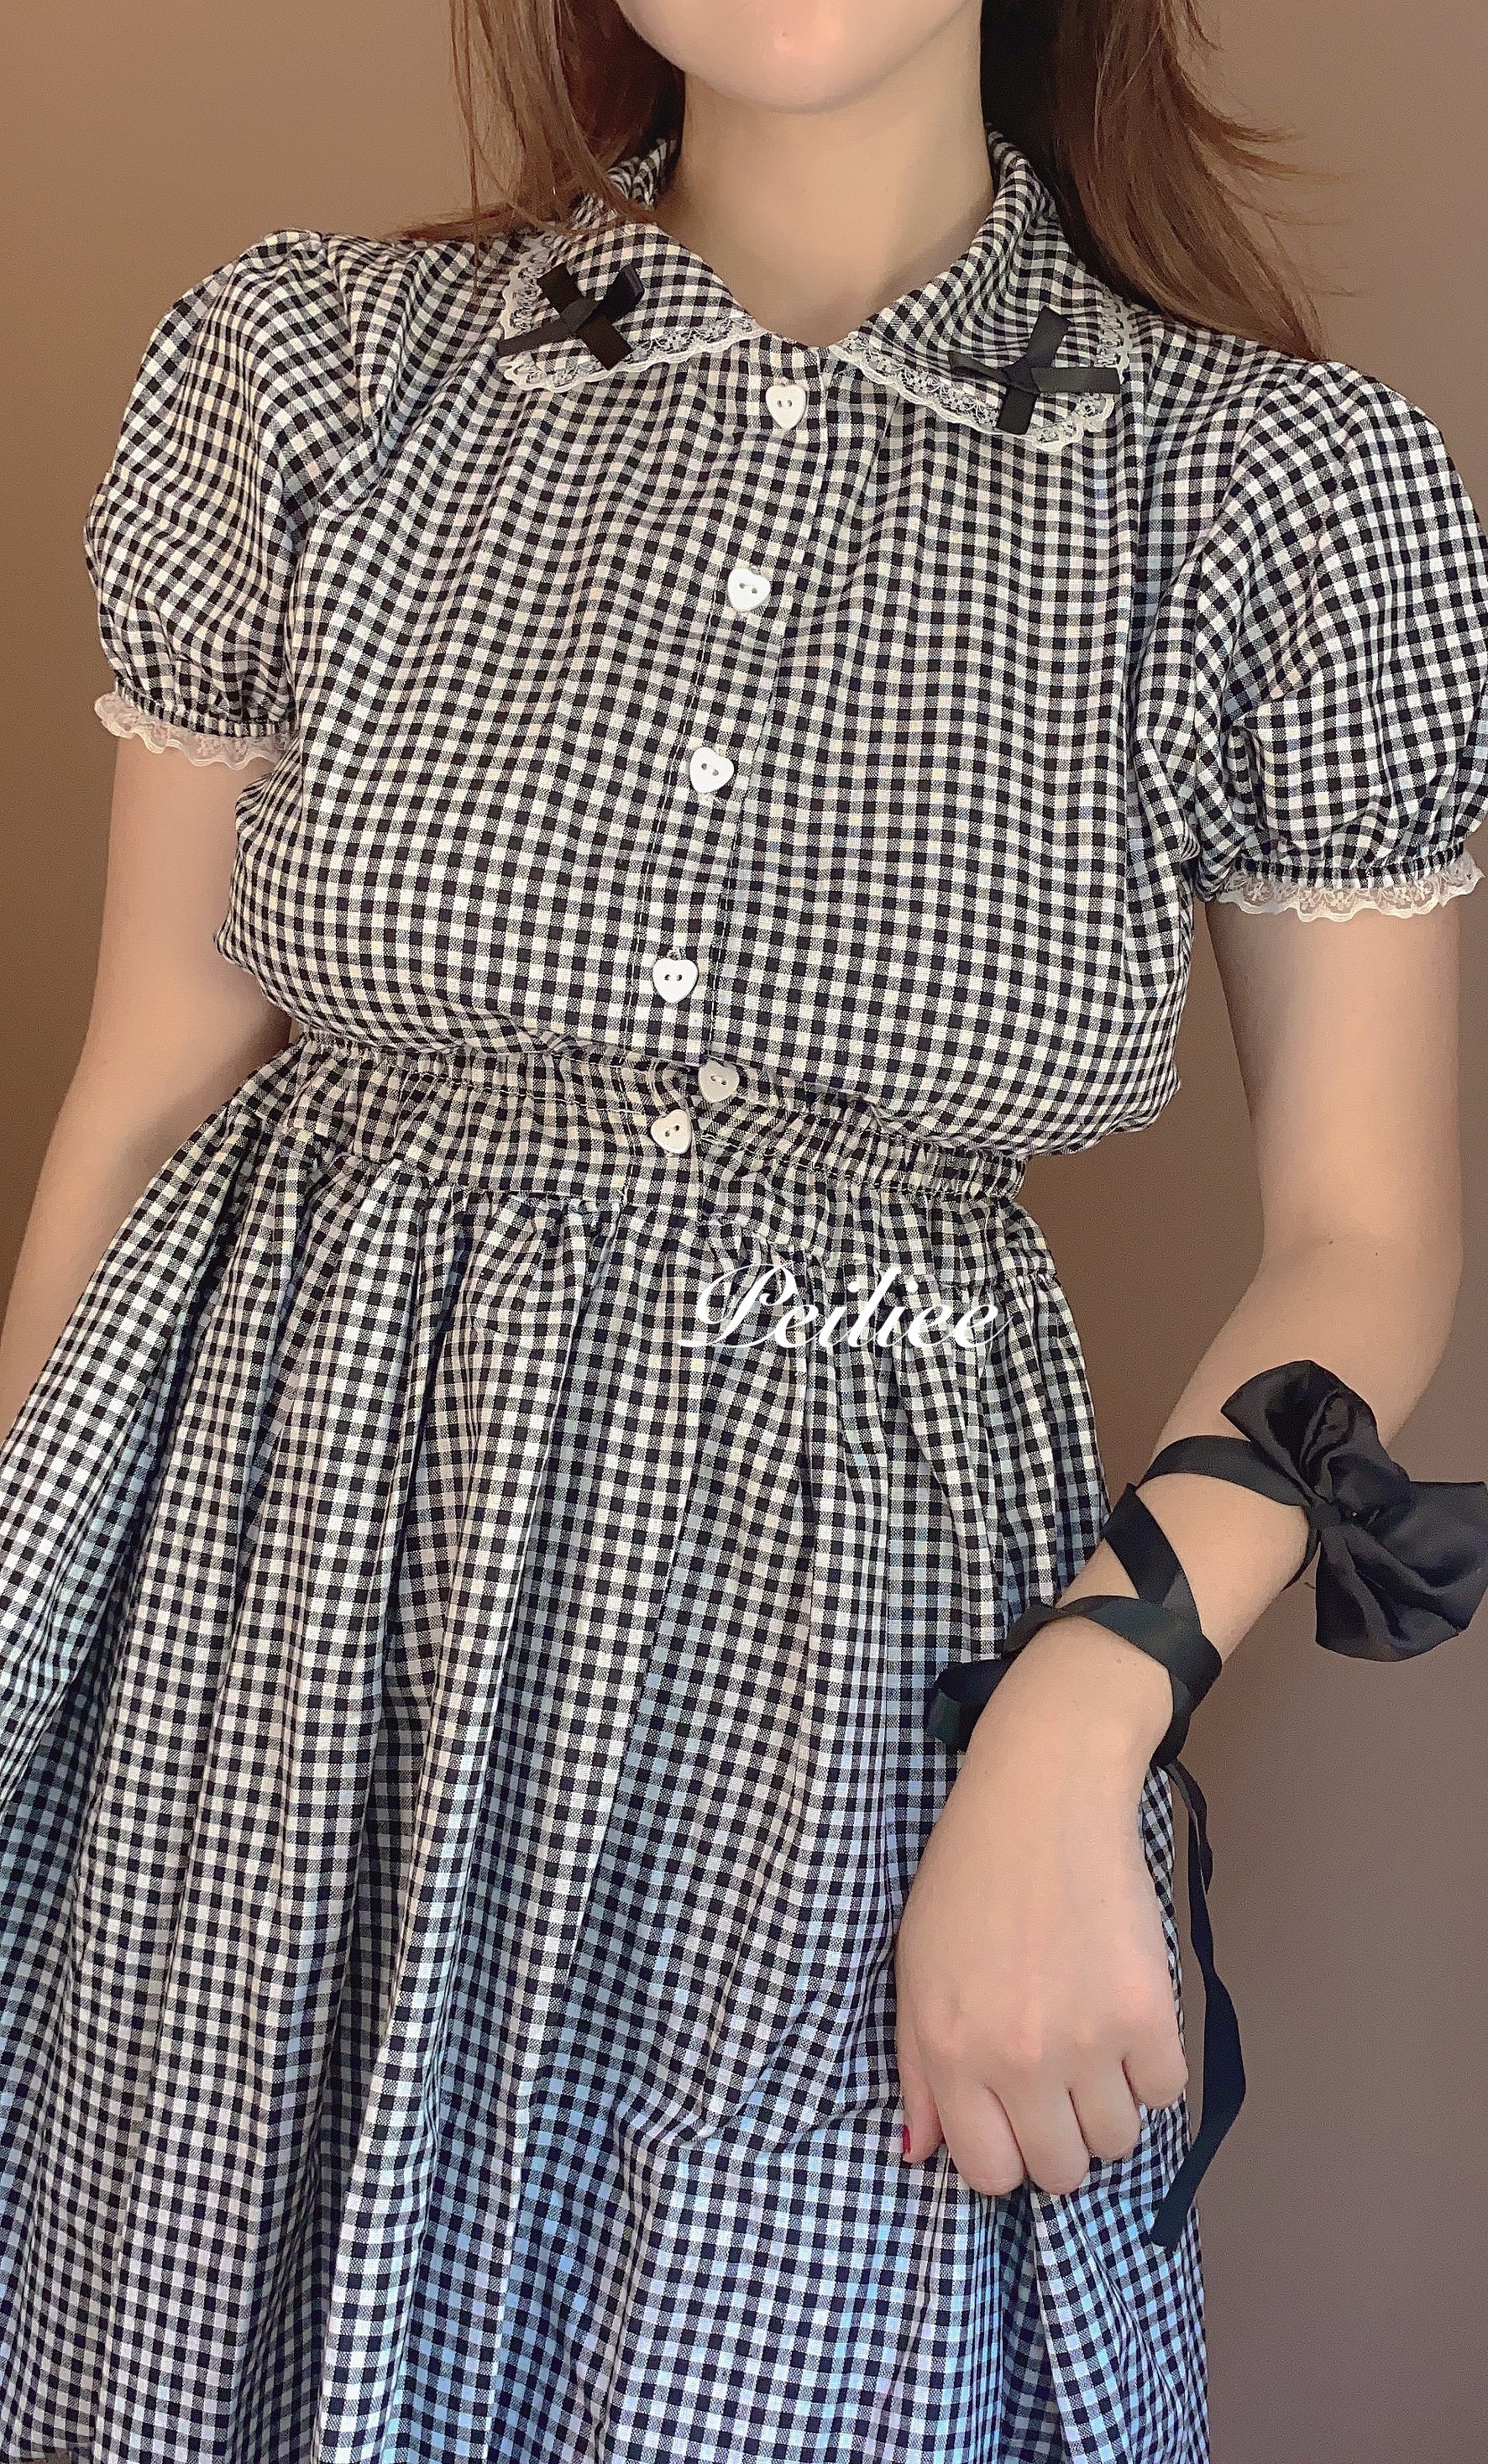 Home [By Peiliee] Afternoon Tea At Tiffany Gingham Babydoll Mini Dress ...